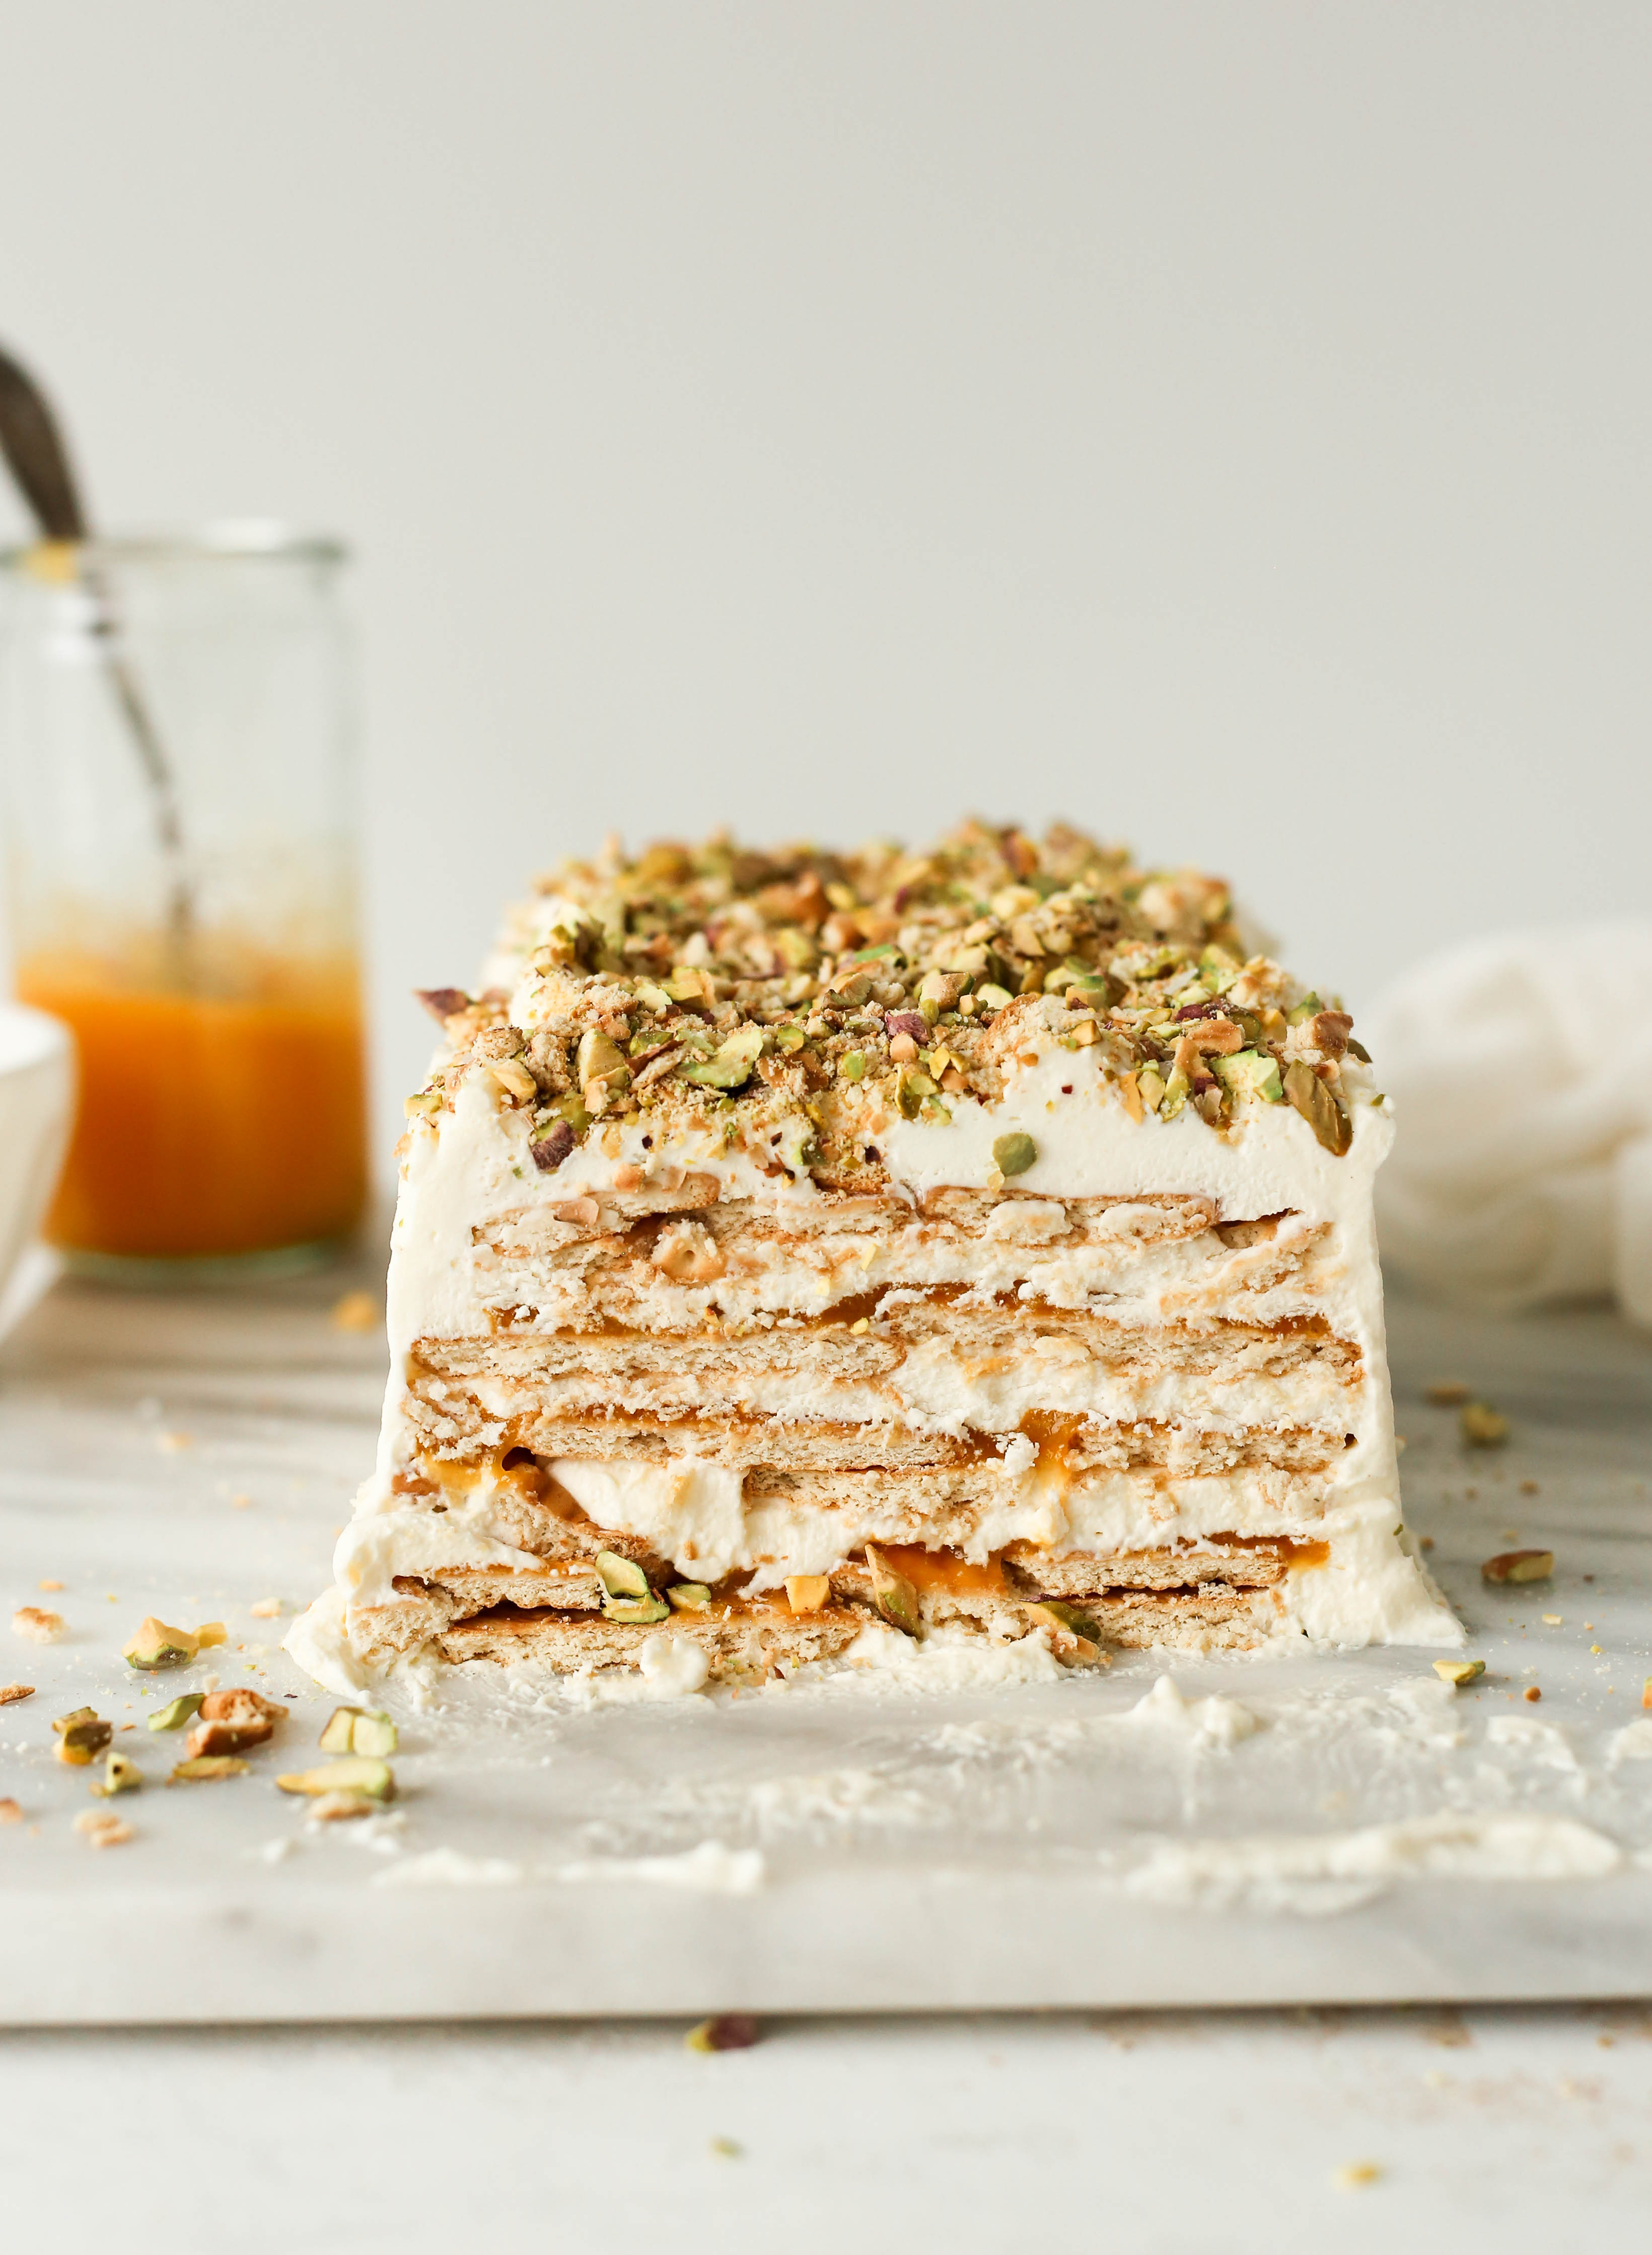 celebrate summer with this no bake mango and cardamom cream icebox cake with a salty pistachio crumble